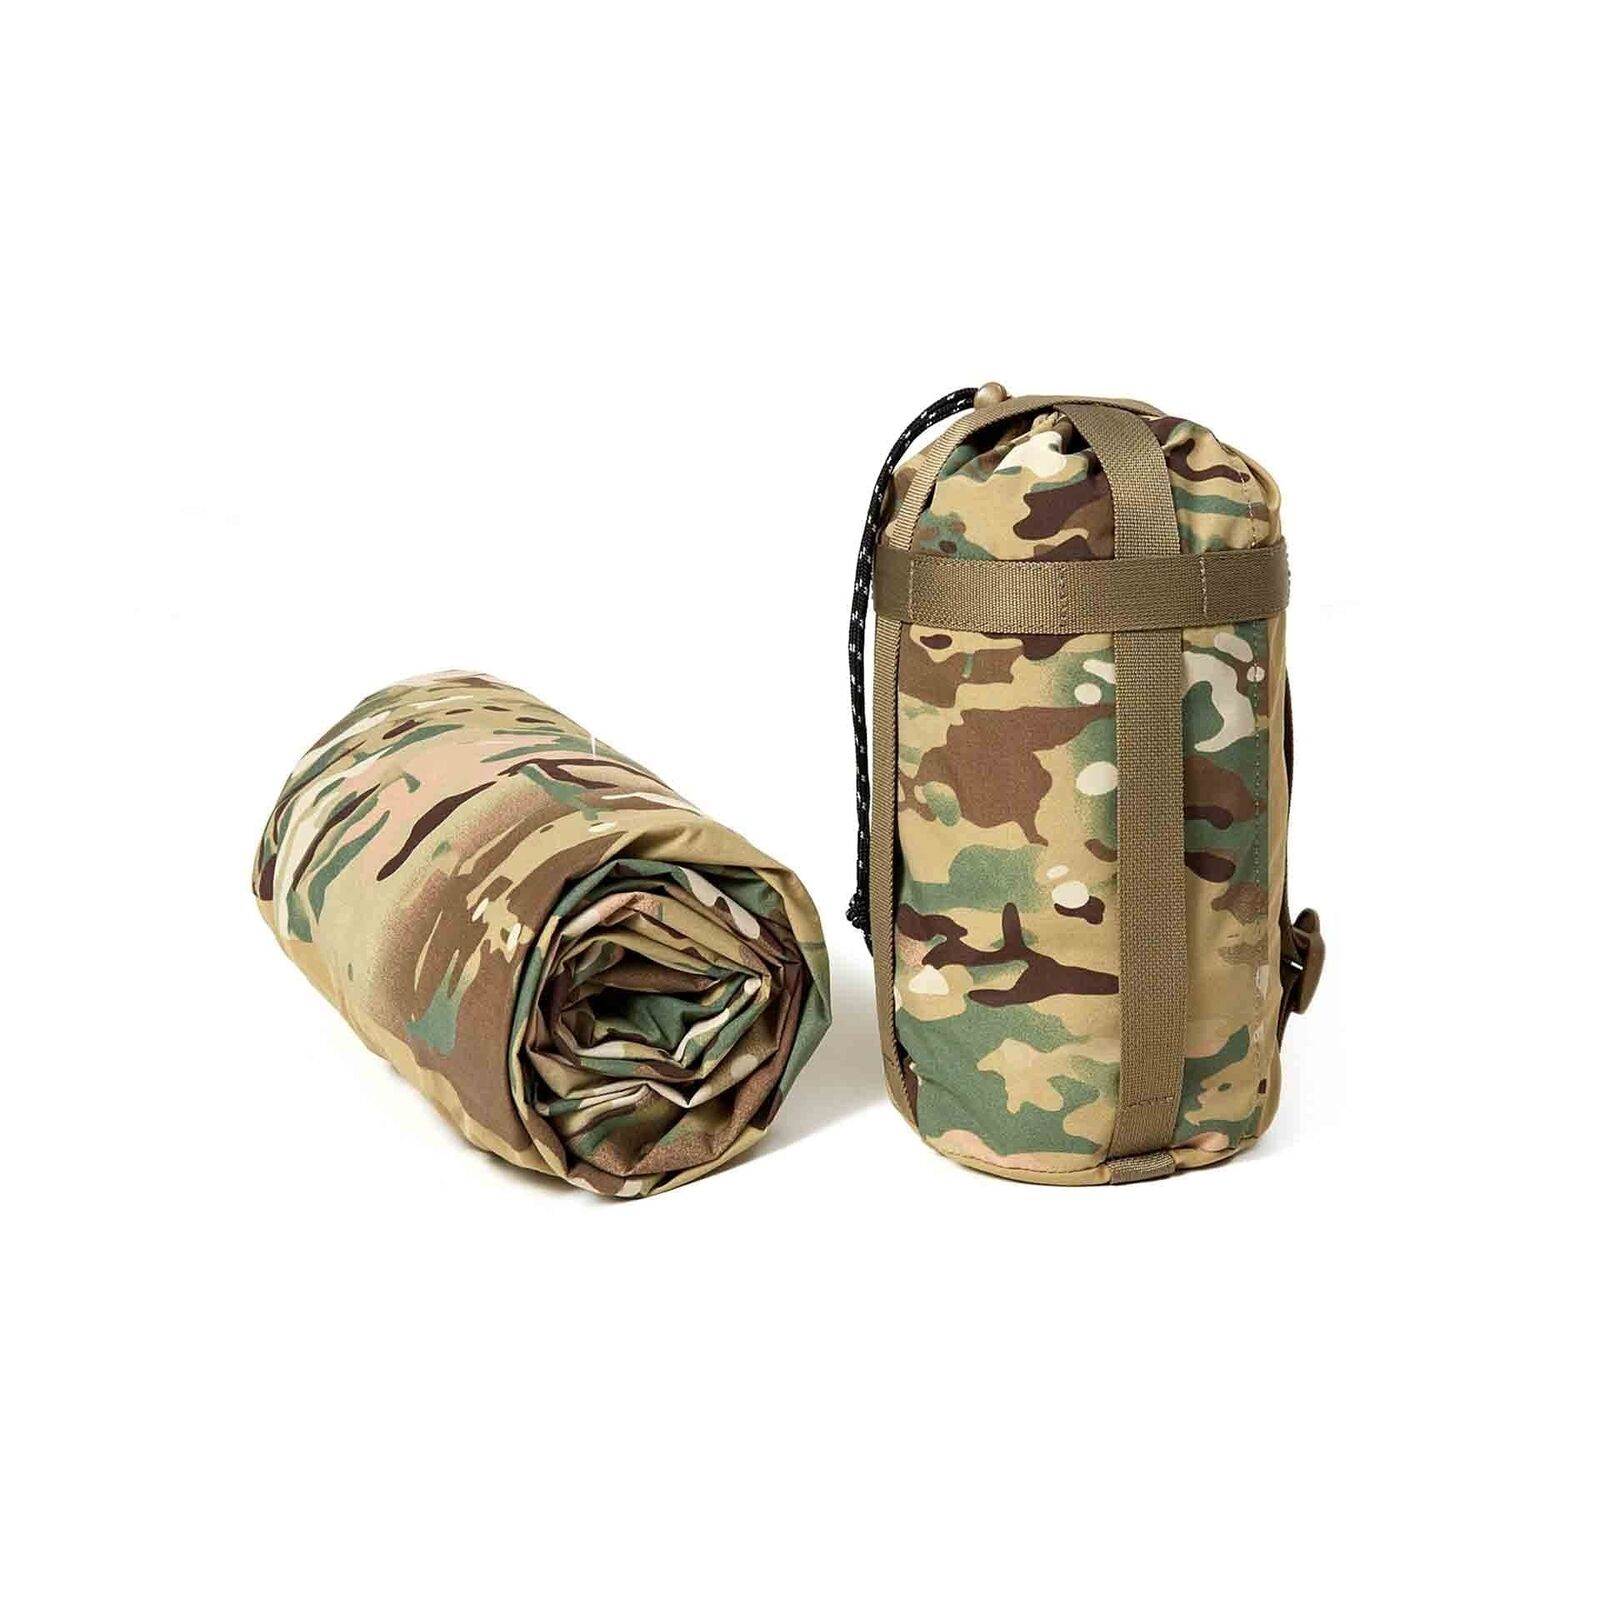 Akmax.cn Bivy Cover Sack for Military Army Modular Sleeping System, Waterproo...